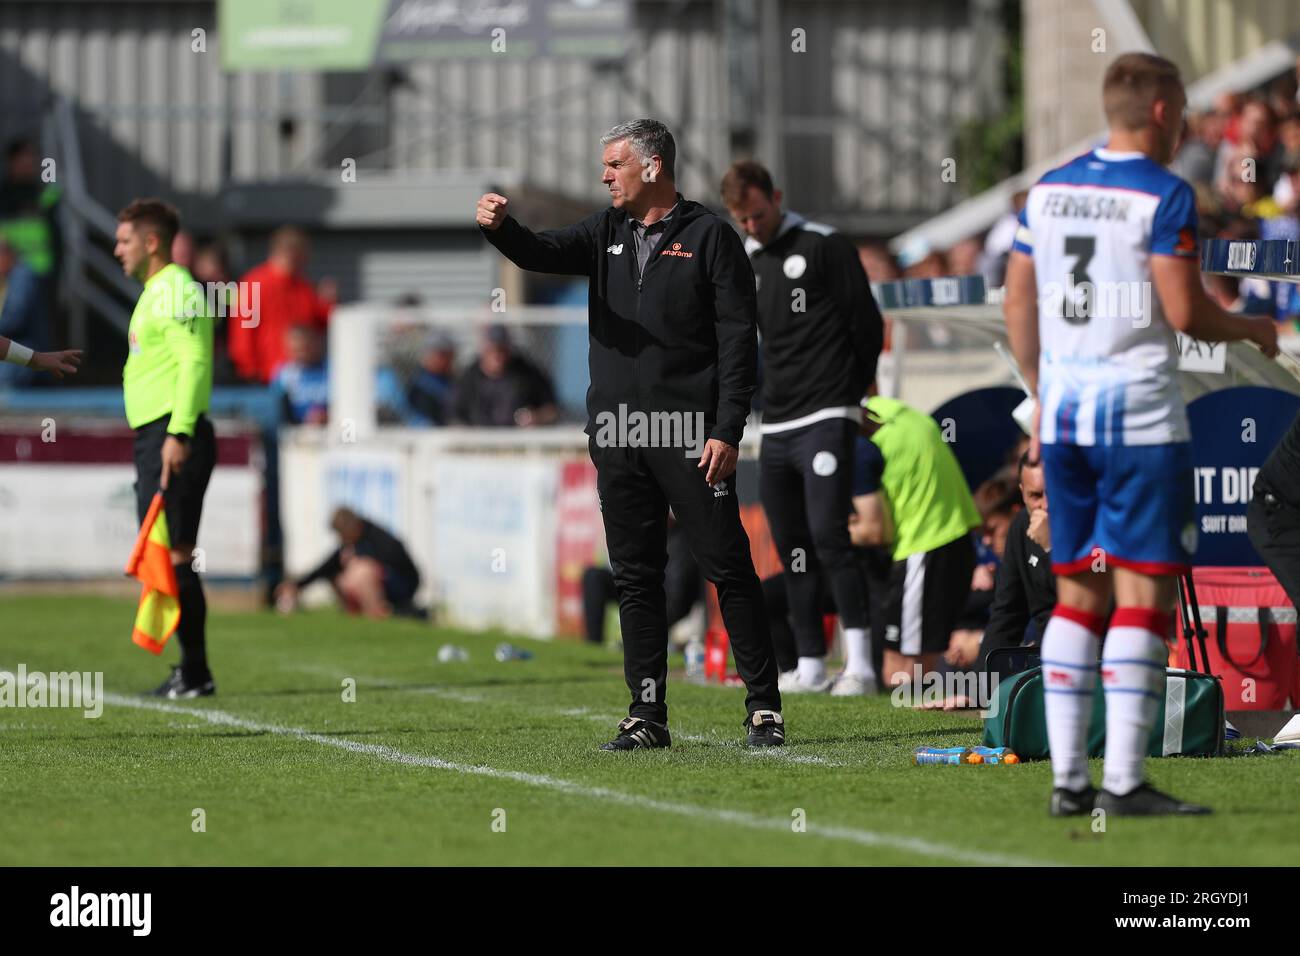 John Askey hoping 'strong words' have desired impact as Hartlepool